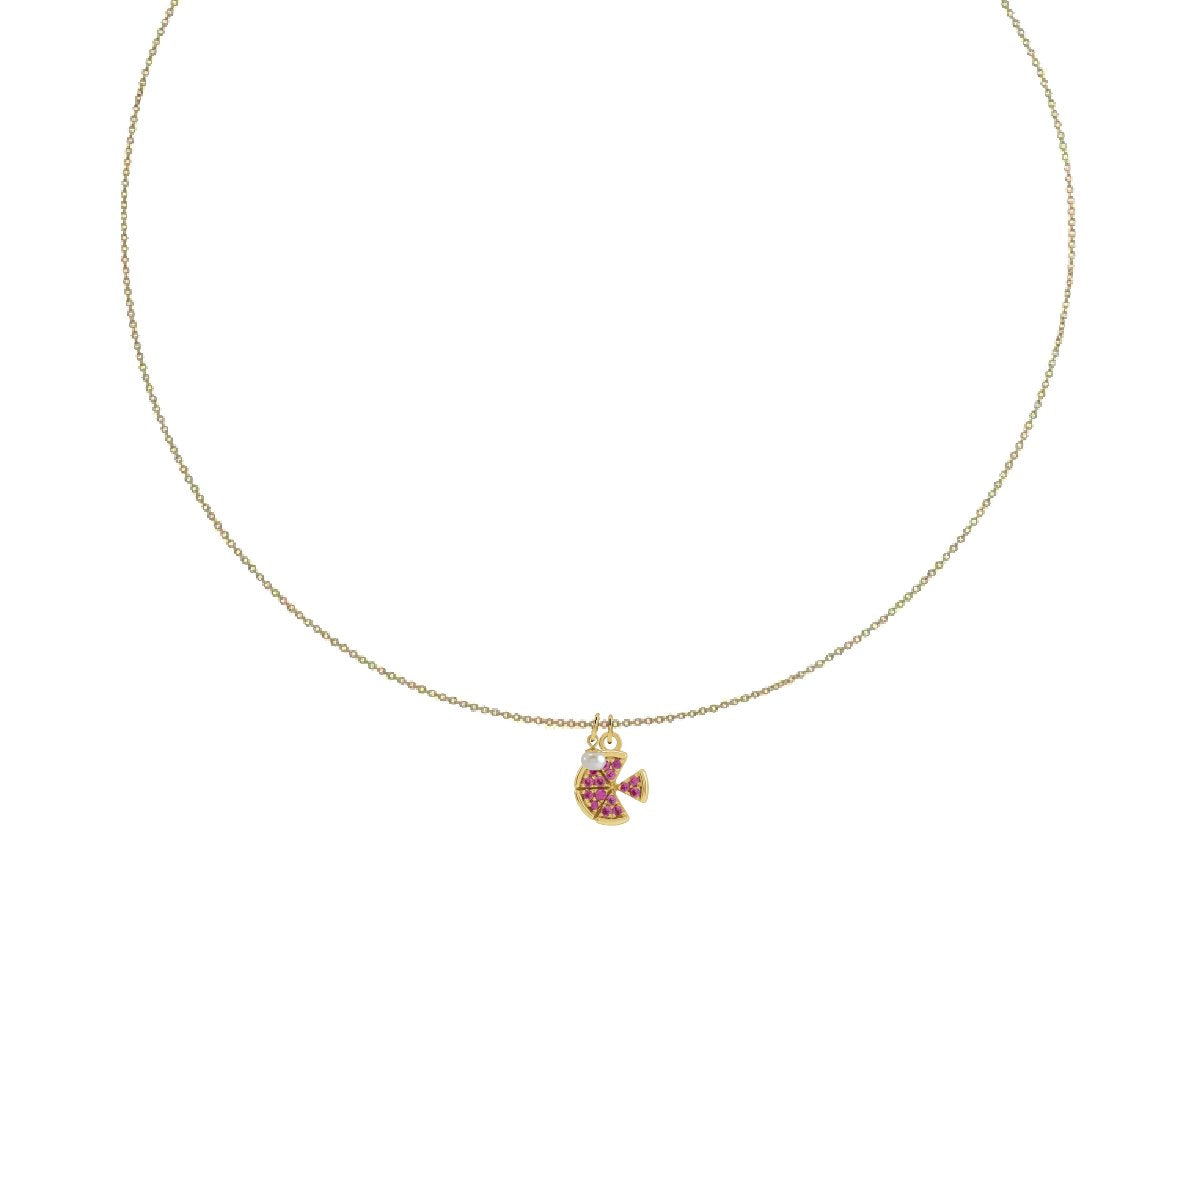 Charm Collection - For the Pie Lover Robyn Canady Charm + 14K Gold Filled Chain Add a Pearl 